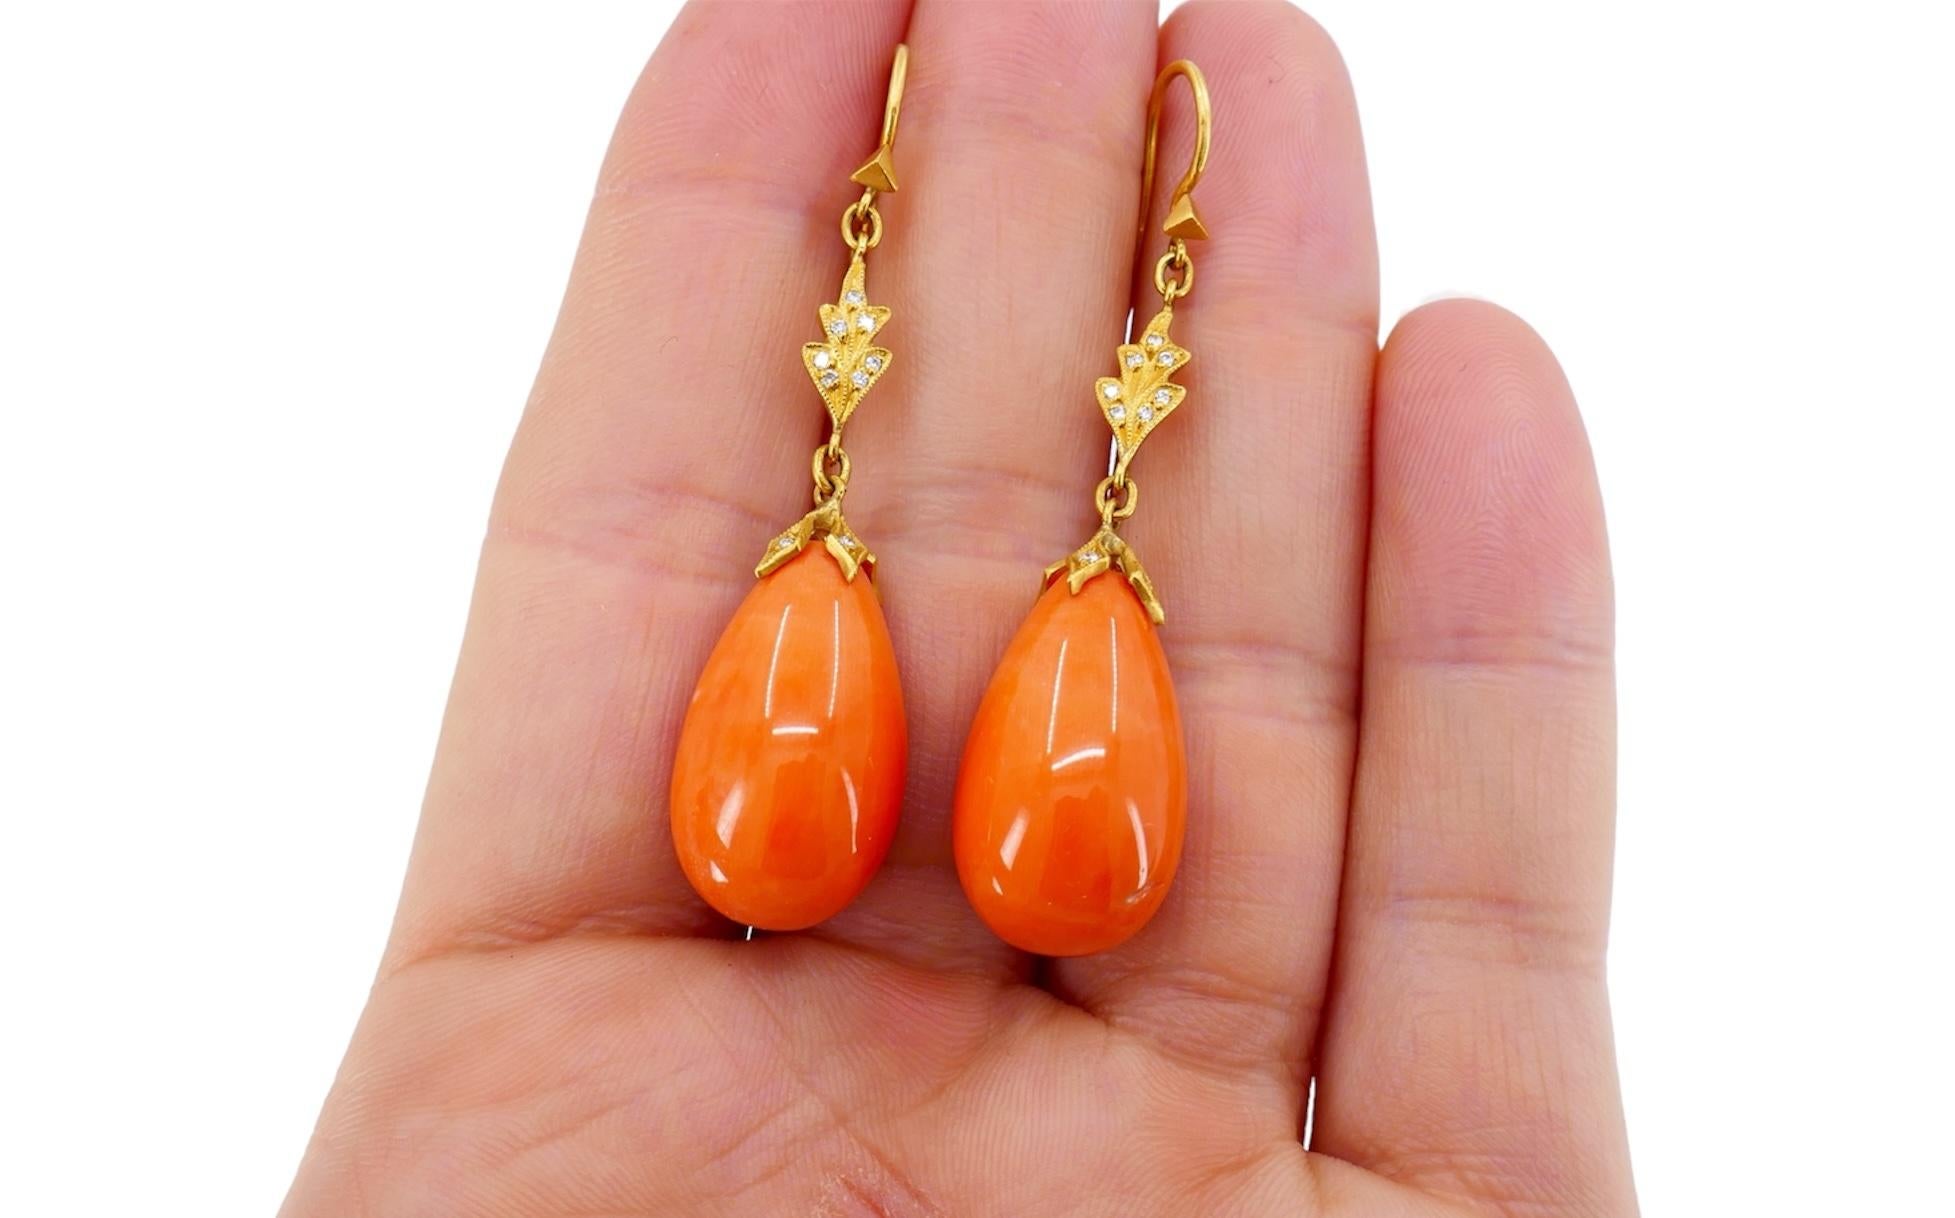 Crafted by designer Cathy Waterman in the 1990s, these Coral drop earrings exude elegance and sophistication. Adorned with 0.08 carats of round brilliant cut diamonds, delicately set in 22k gold, they epitomize timeless luxury. With dimensions of